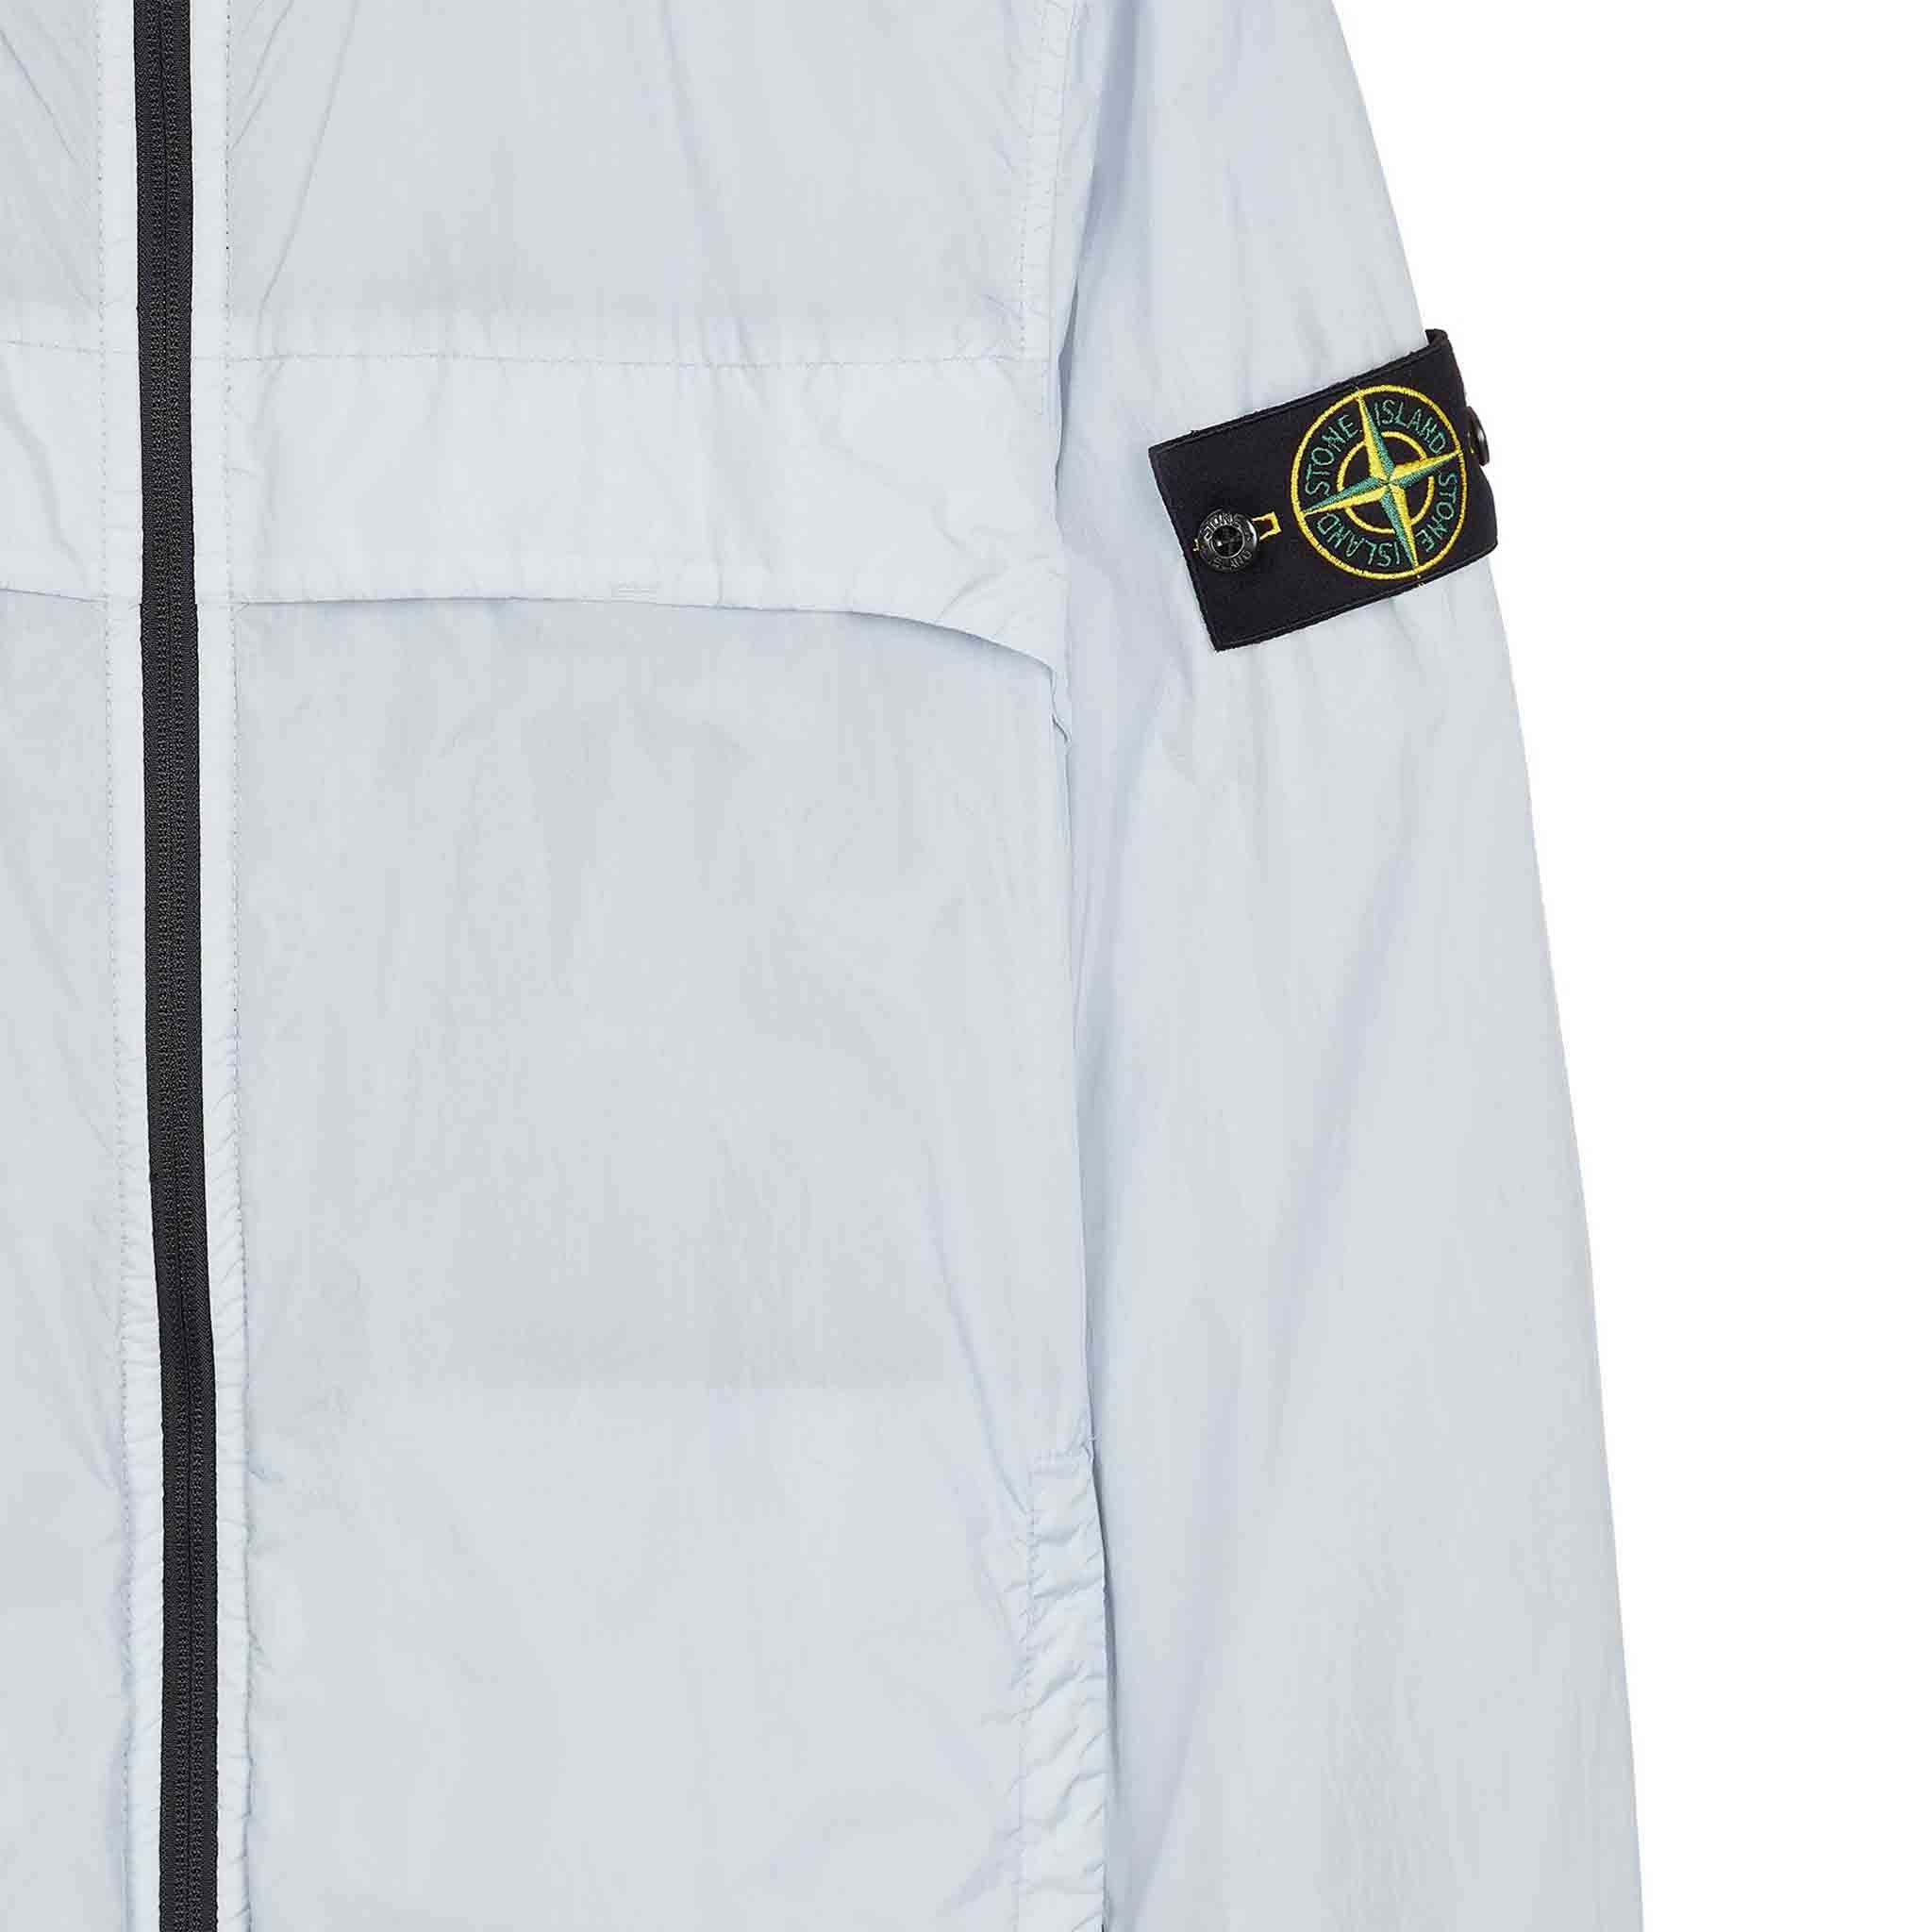 Stone Island Garment Dyed Crinkle Reps R-NY Overshirt in Sky Blue